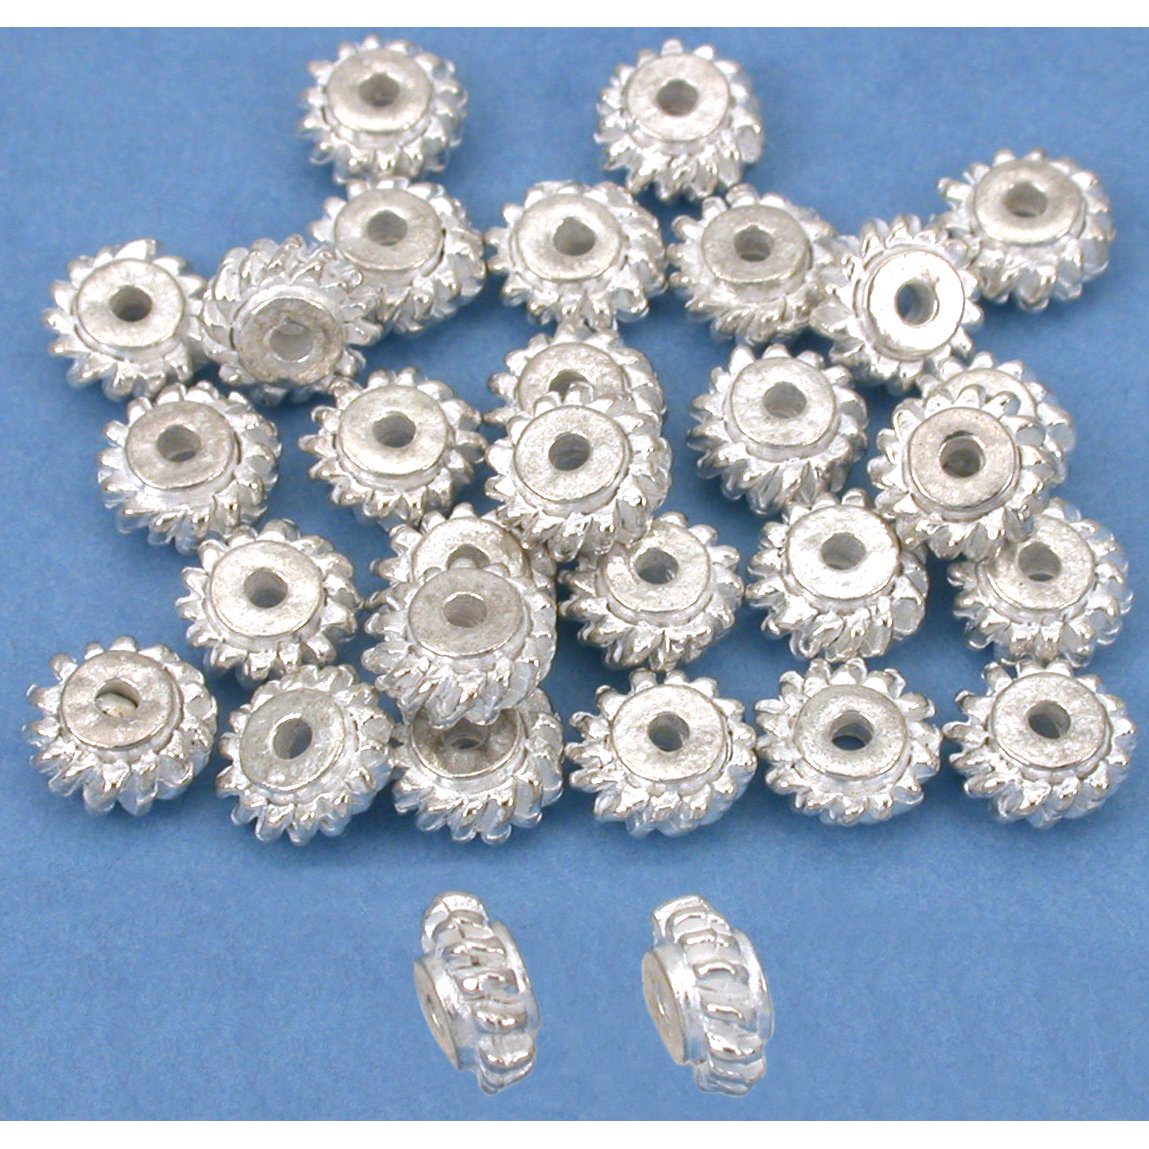 Bali Spacer Beads Silver Plated 7mm 30Pcs Approx.